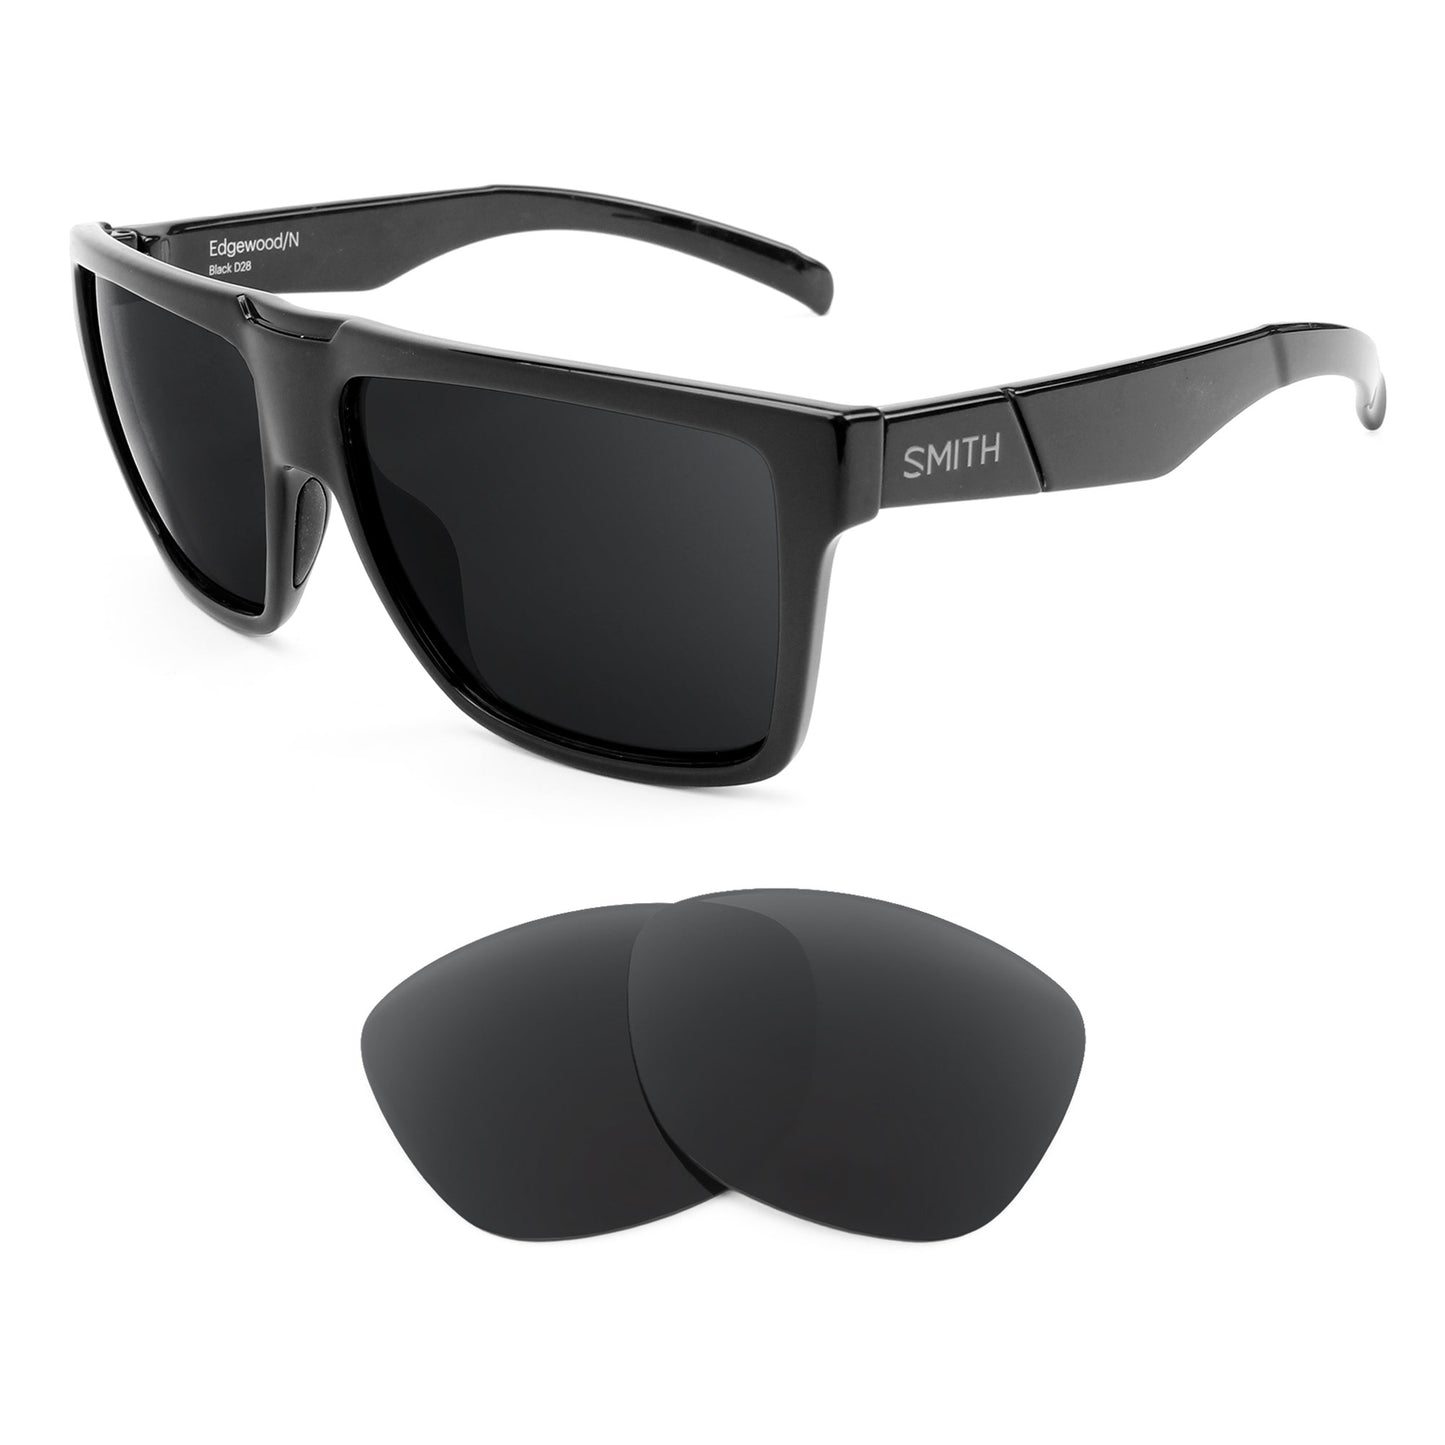 Smith Edgewood sunglasses with replacement lenses